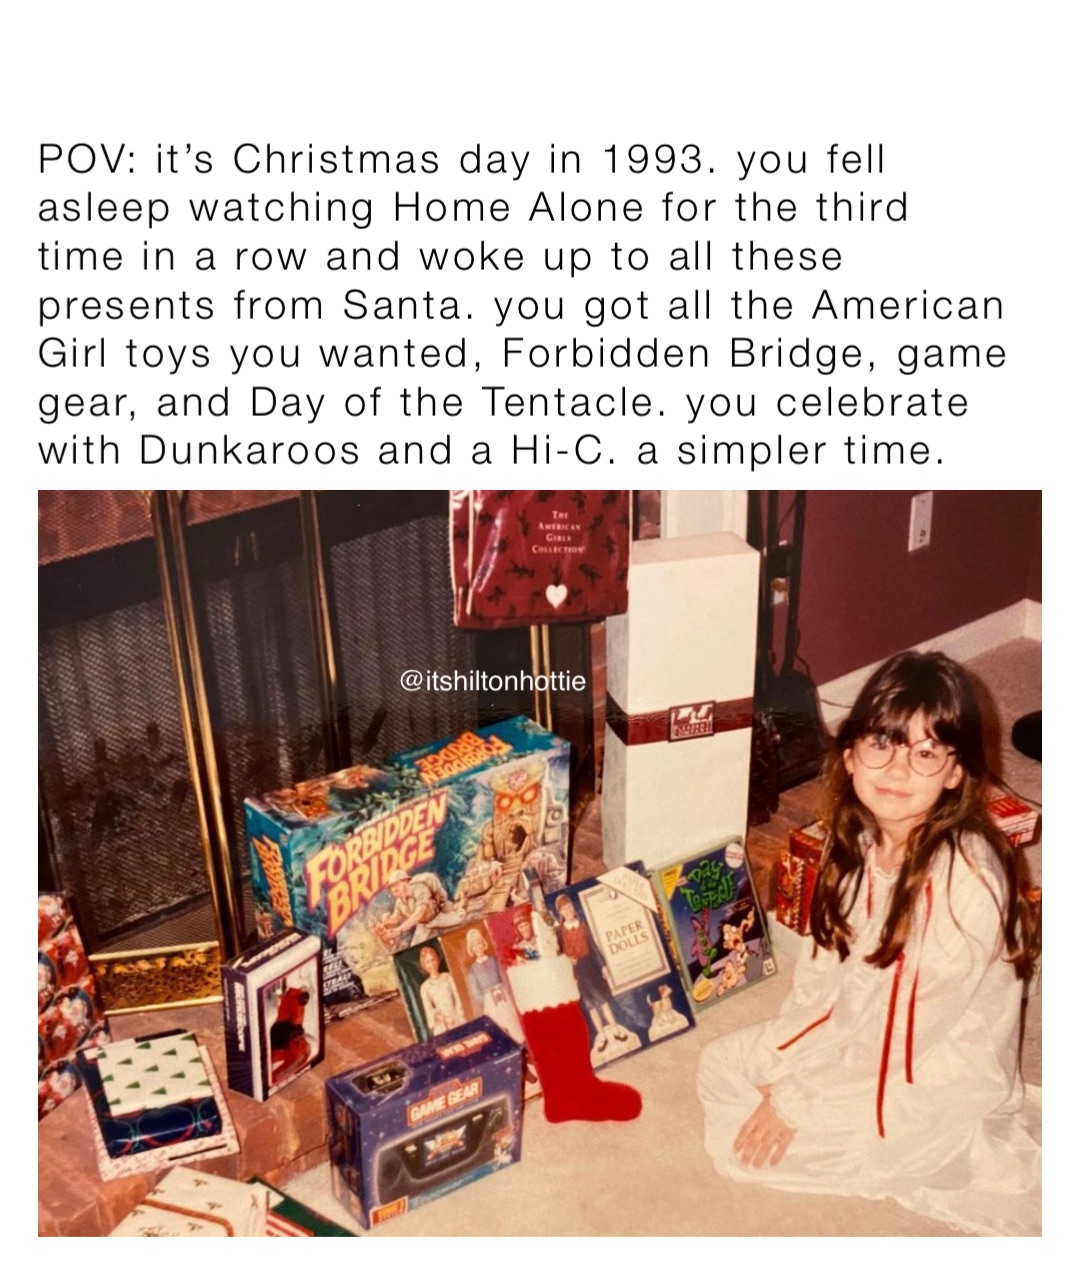 POV: it’s Christmas day in 1993. you fell asleep watching Home Alone for the third time in a row and woke up to all these presents from Santa. you got all the American Girl toys you wanted, Forbidden Bridge, game gear, and Day of the Tentacle. you celebrate with Dunkaroos and a Hi-C. a simpler time.